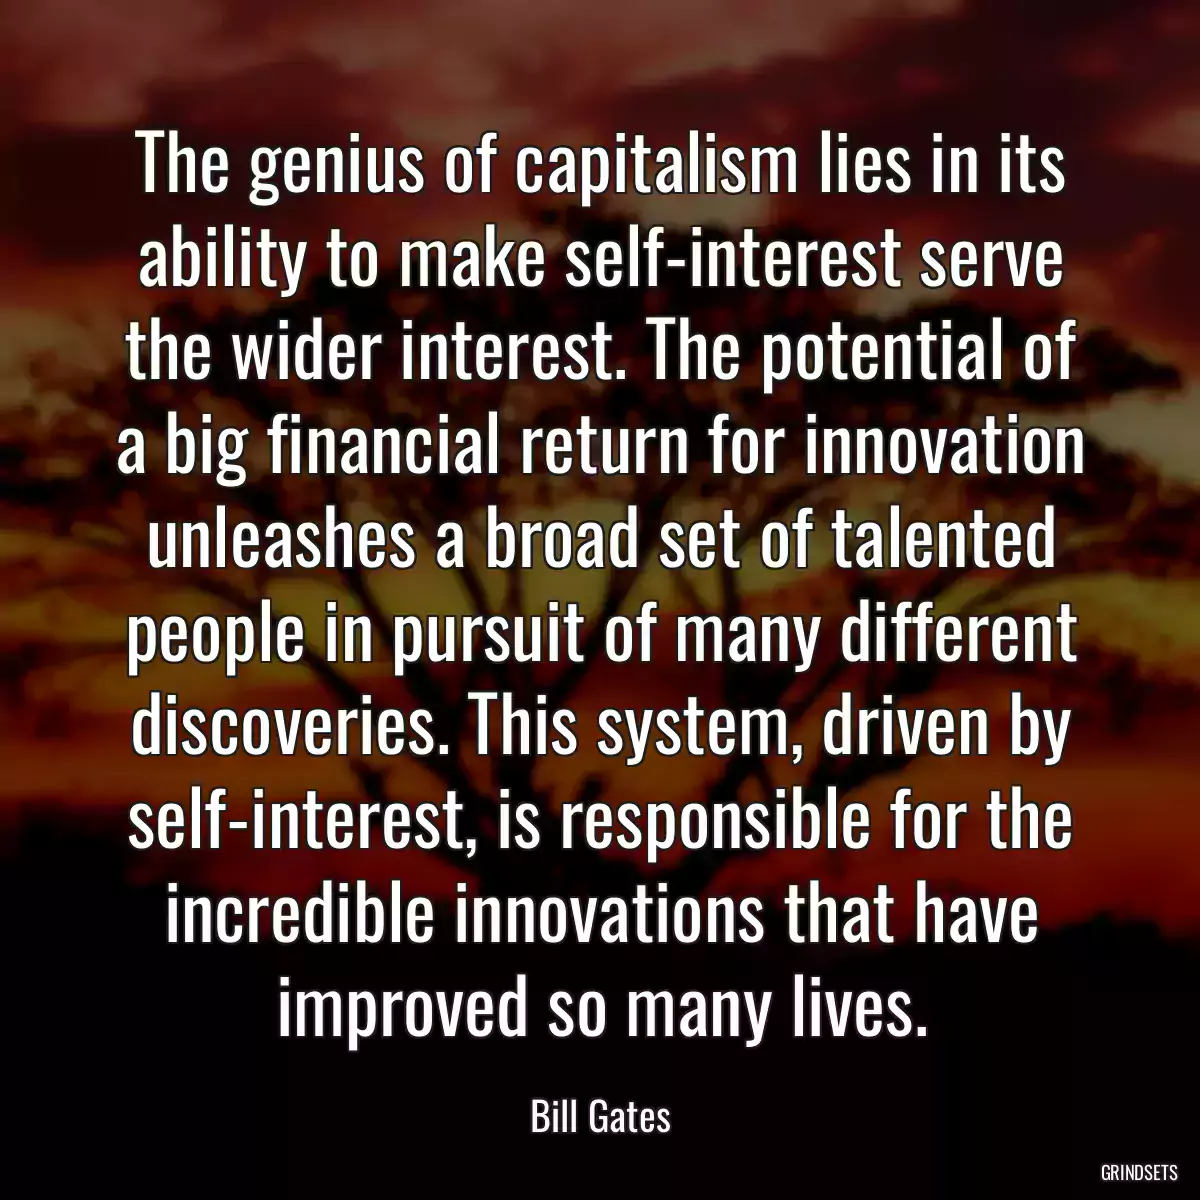 The genius of capitalism lies in its ability to make self-interest serve the wider interest. The potential of a big financial return for innovation unleashes a broad set of talented people in pursuit of many different discoveries. This system, driven by self-interest, is responsible for the incredible innovations that have improved so many lives.